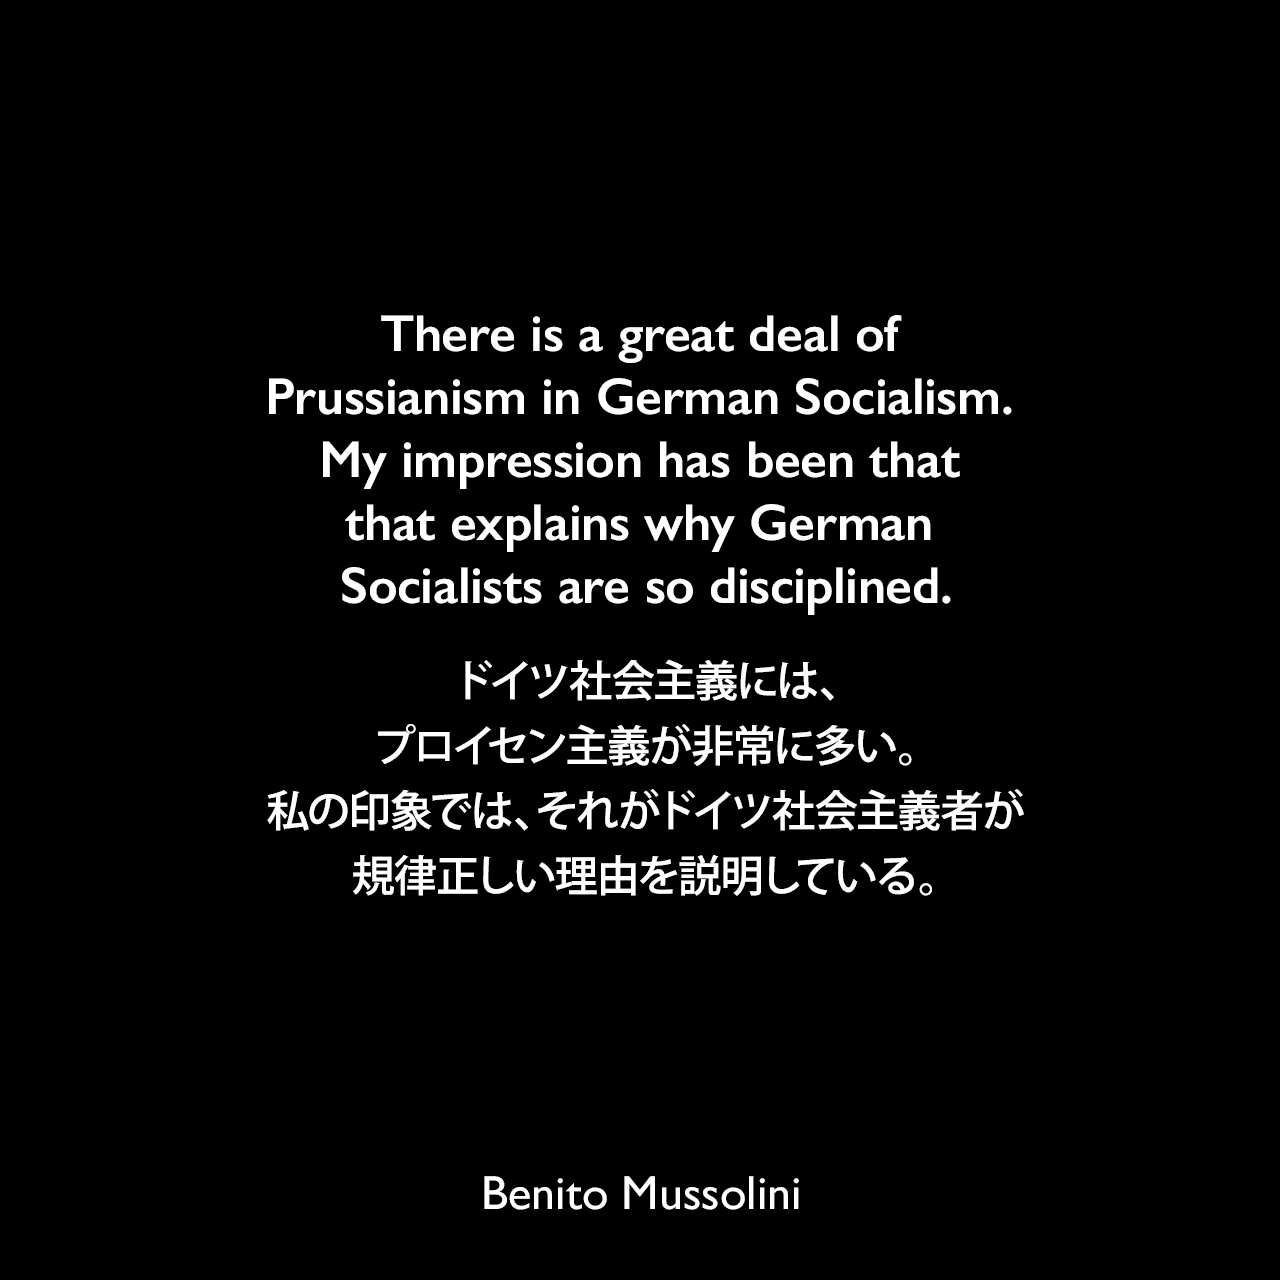 There is a great deal of Prussianism in German Socialism. My impression has been that that explains why German Socialists are so disciplined.ドイツ社会主義には、プロイセン主義が非常に多い。私の印象では、それがドイツ社会主義者が規律正しい理由を説明している。- 1932年3月23日から4月4日、ローマのヴェネツィア宮殿でのインタビューよりBenito Mussolini